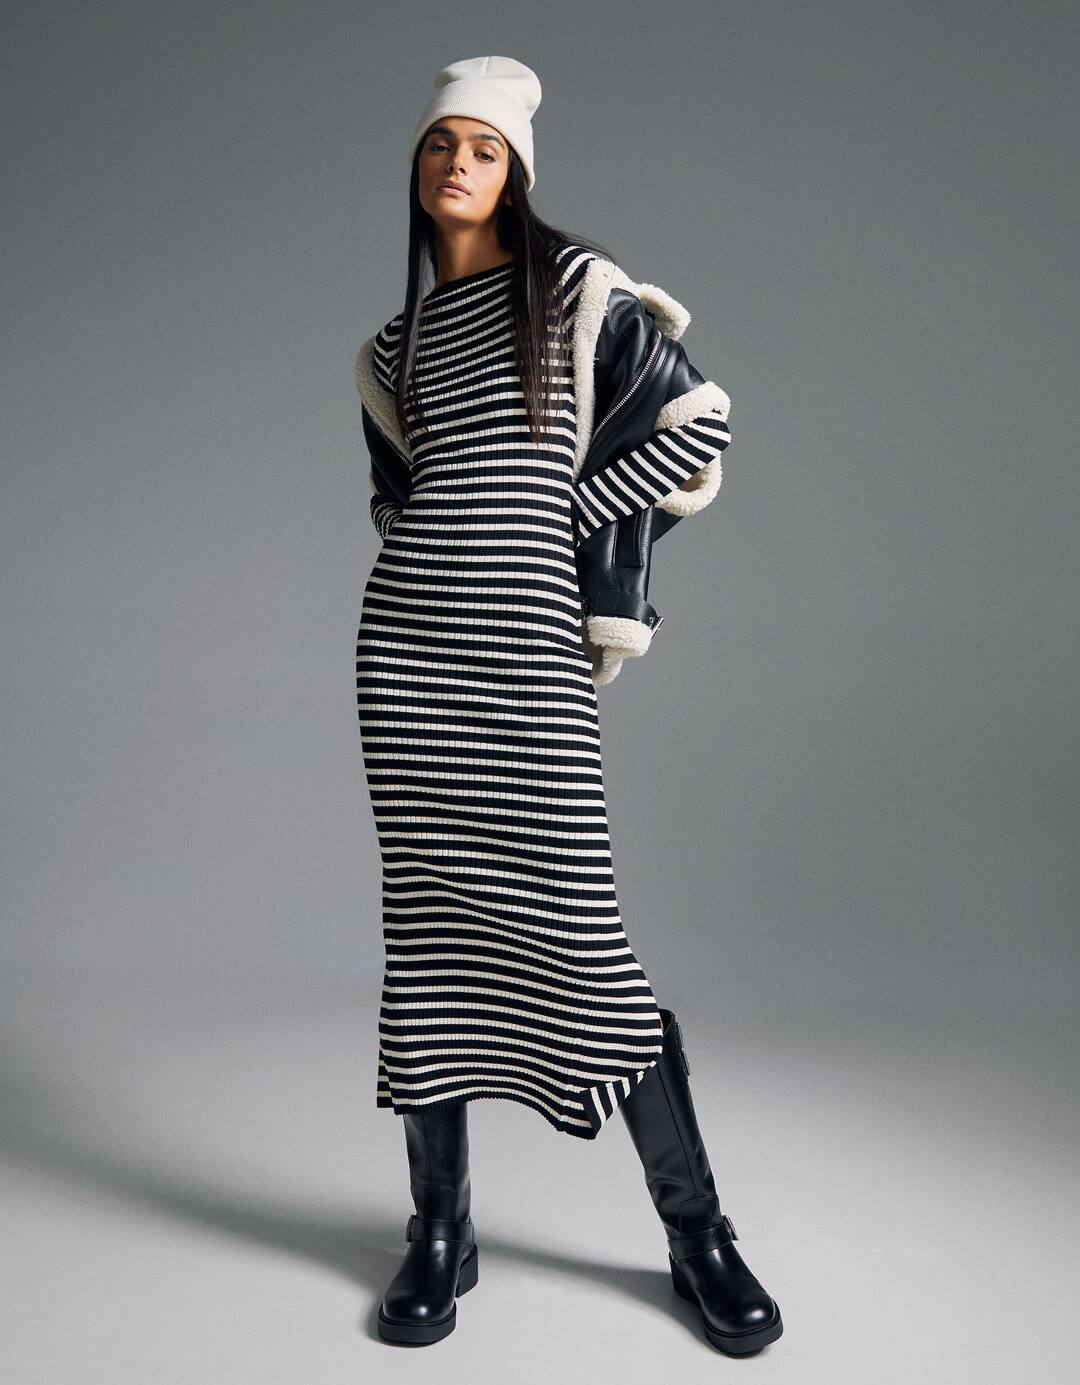 Midi dress with long sleeves and ribbed knit boat neck